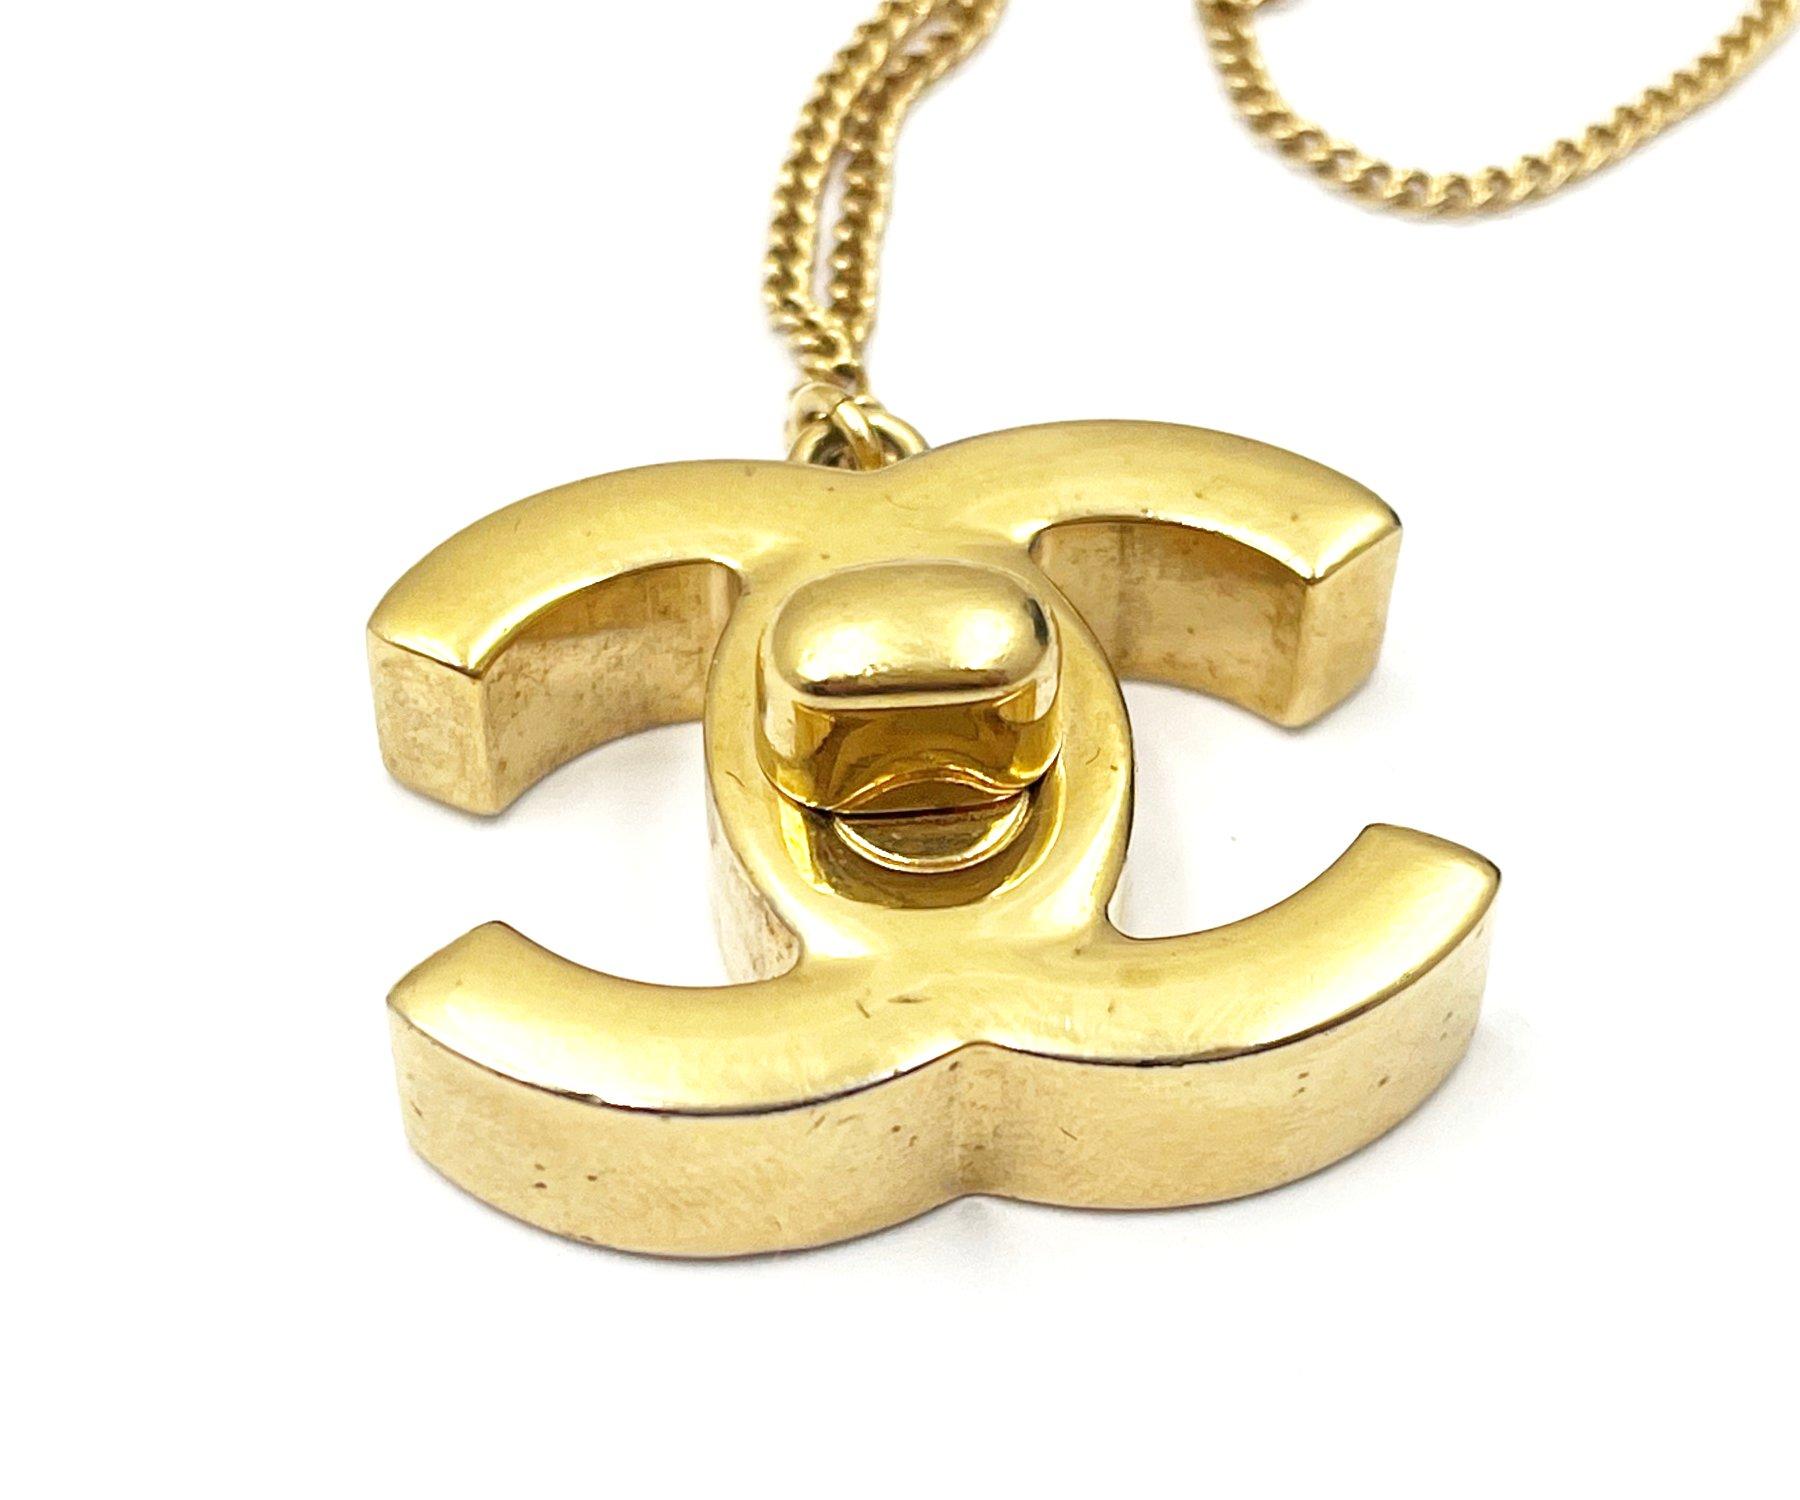 Chanel Classic Iconic Gold CC Turnlock Large Pendant Necklace   In Excellent Condition For Sale In Pasadena, CA